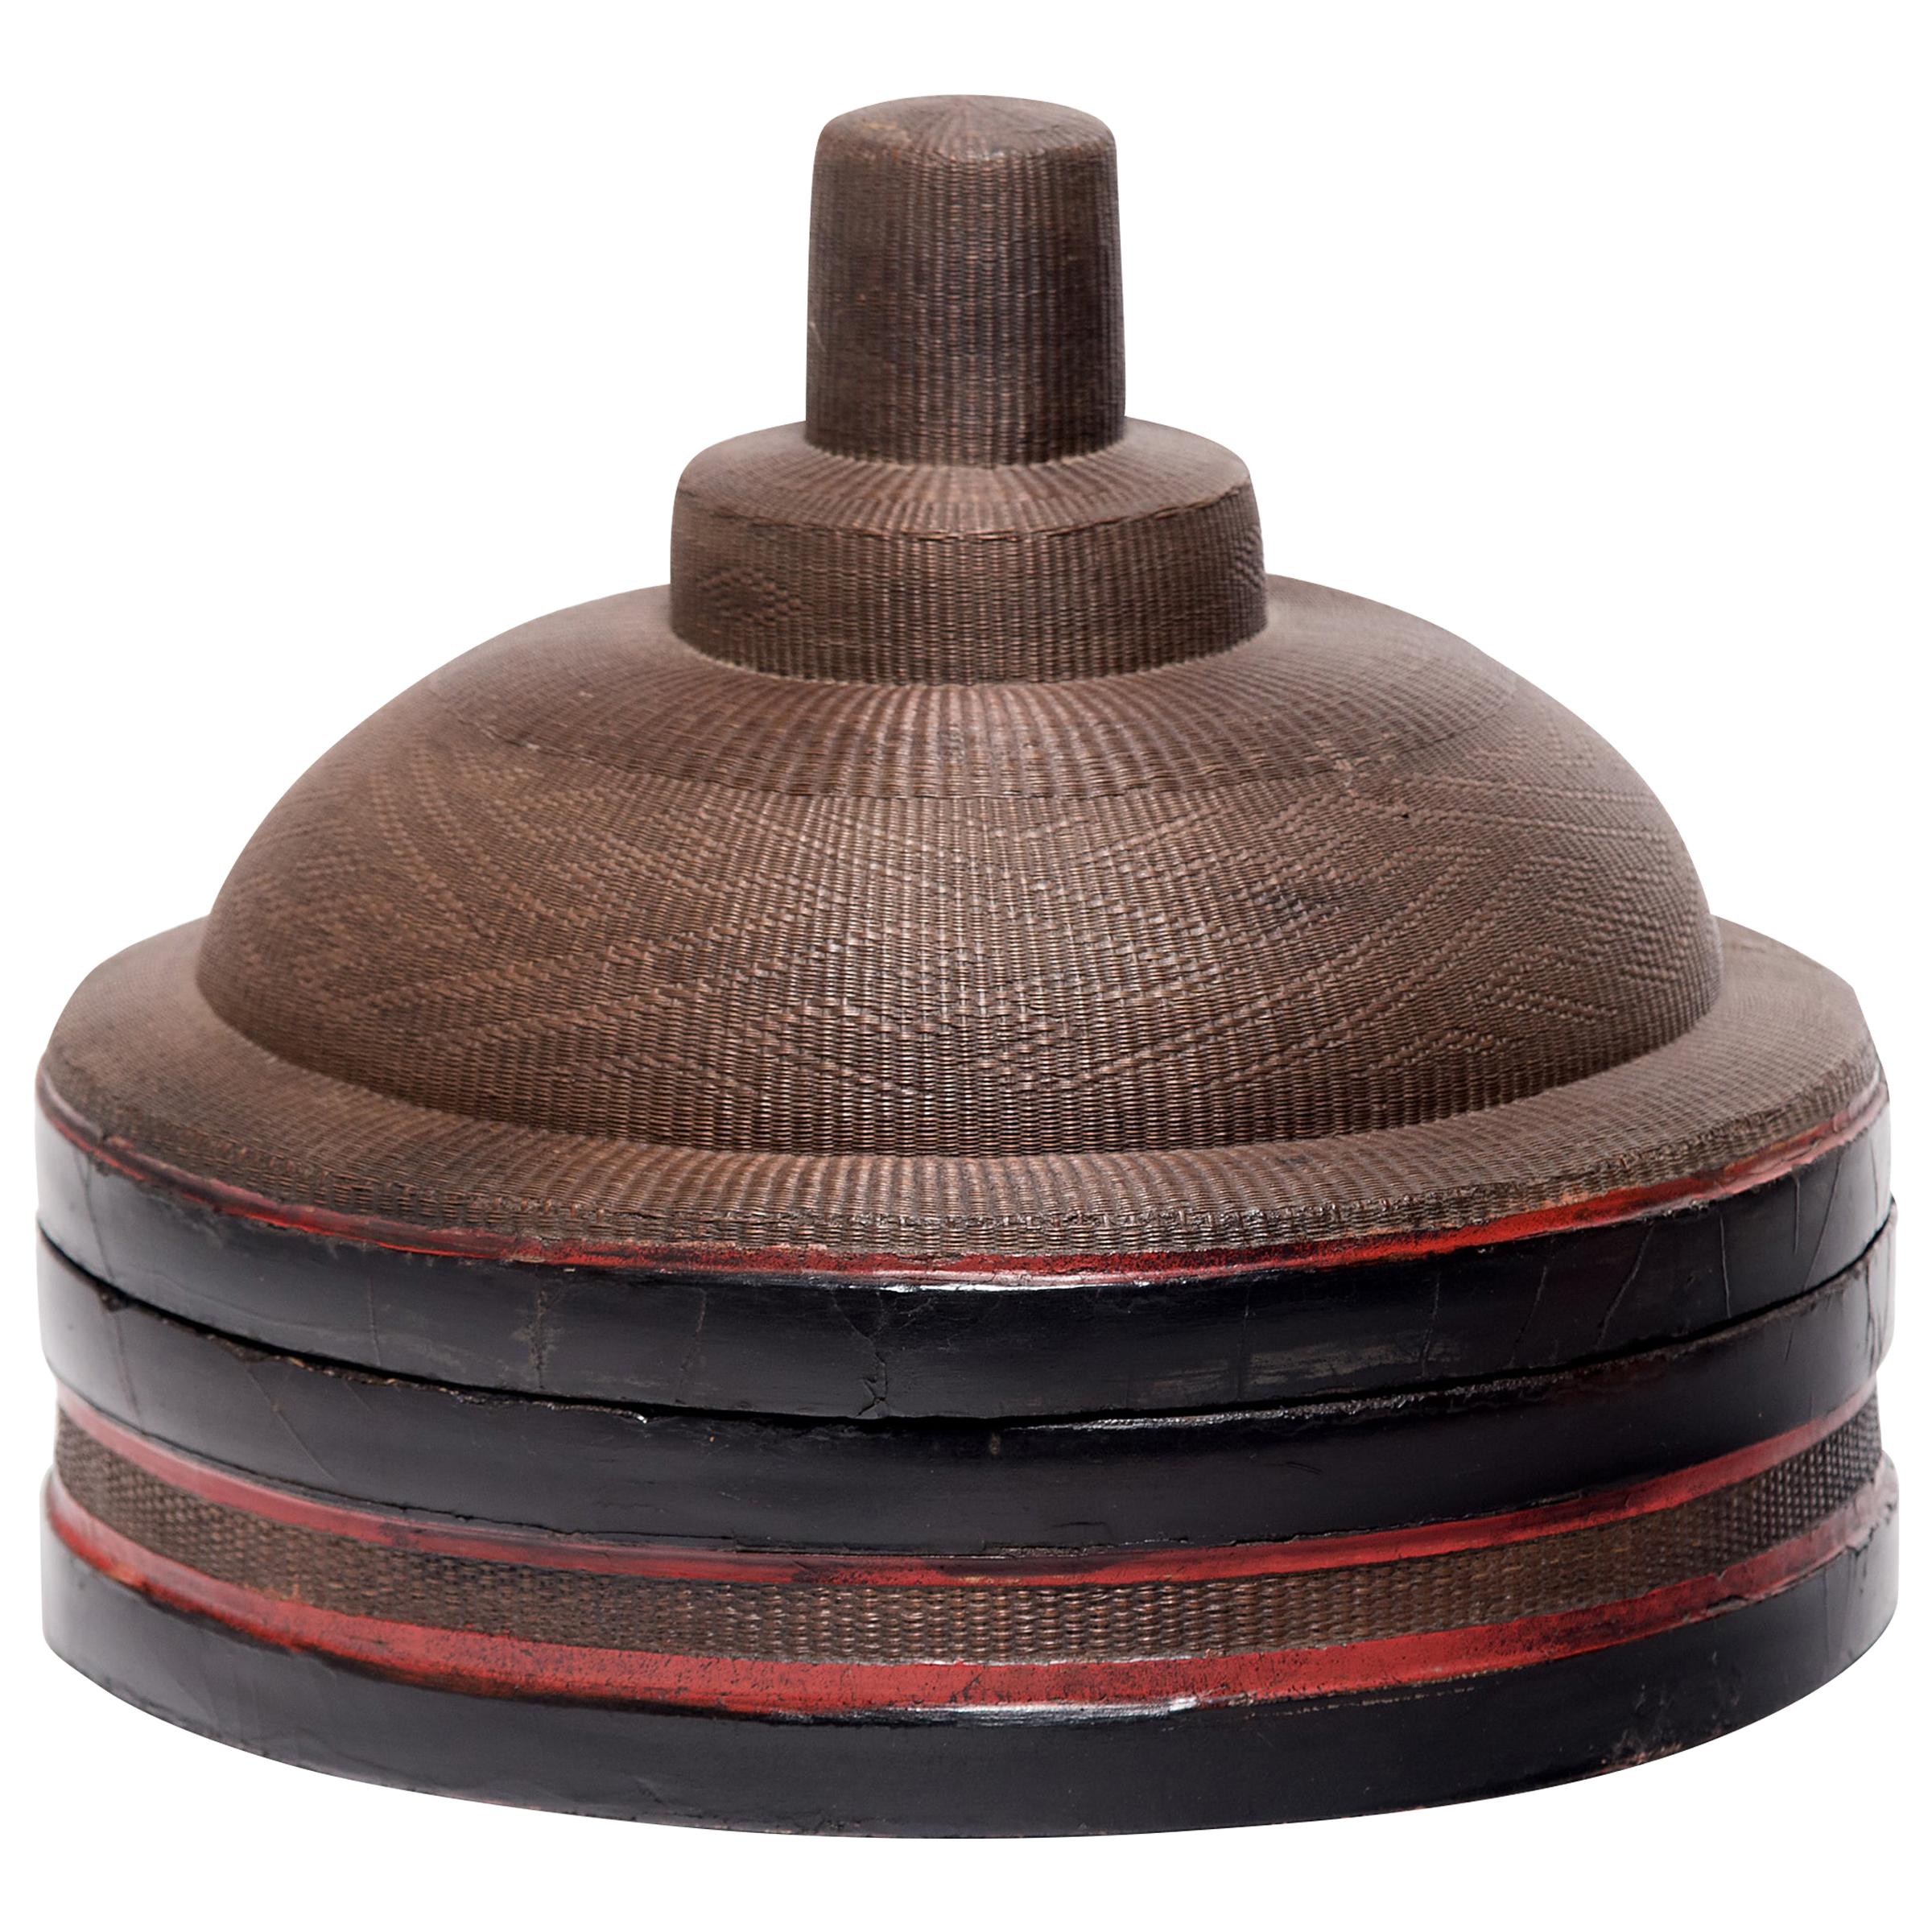 No self-respecting man in Qing-dynasty China would leave the house without some kind of hat. In fact, headgear was so central to social status that even the containers used to store one's hat were beautifully constructed.

Finely woven with an